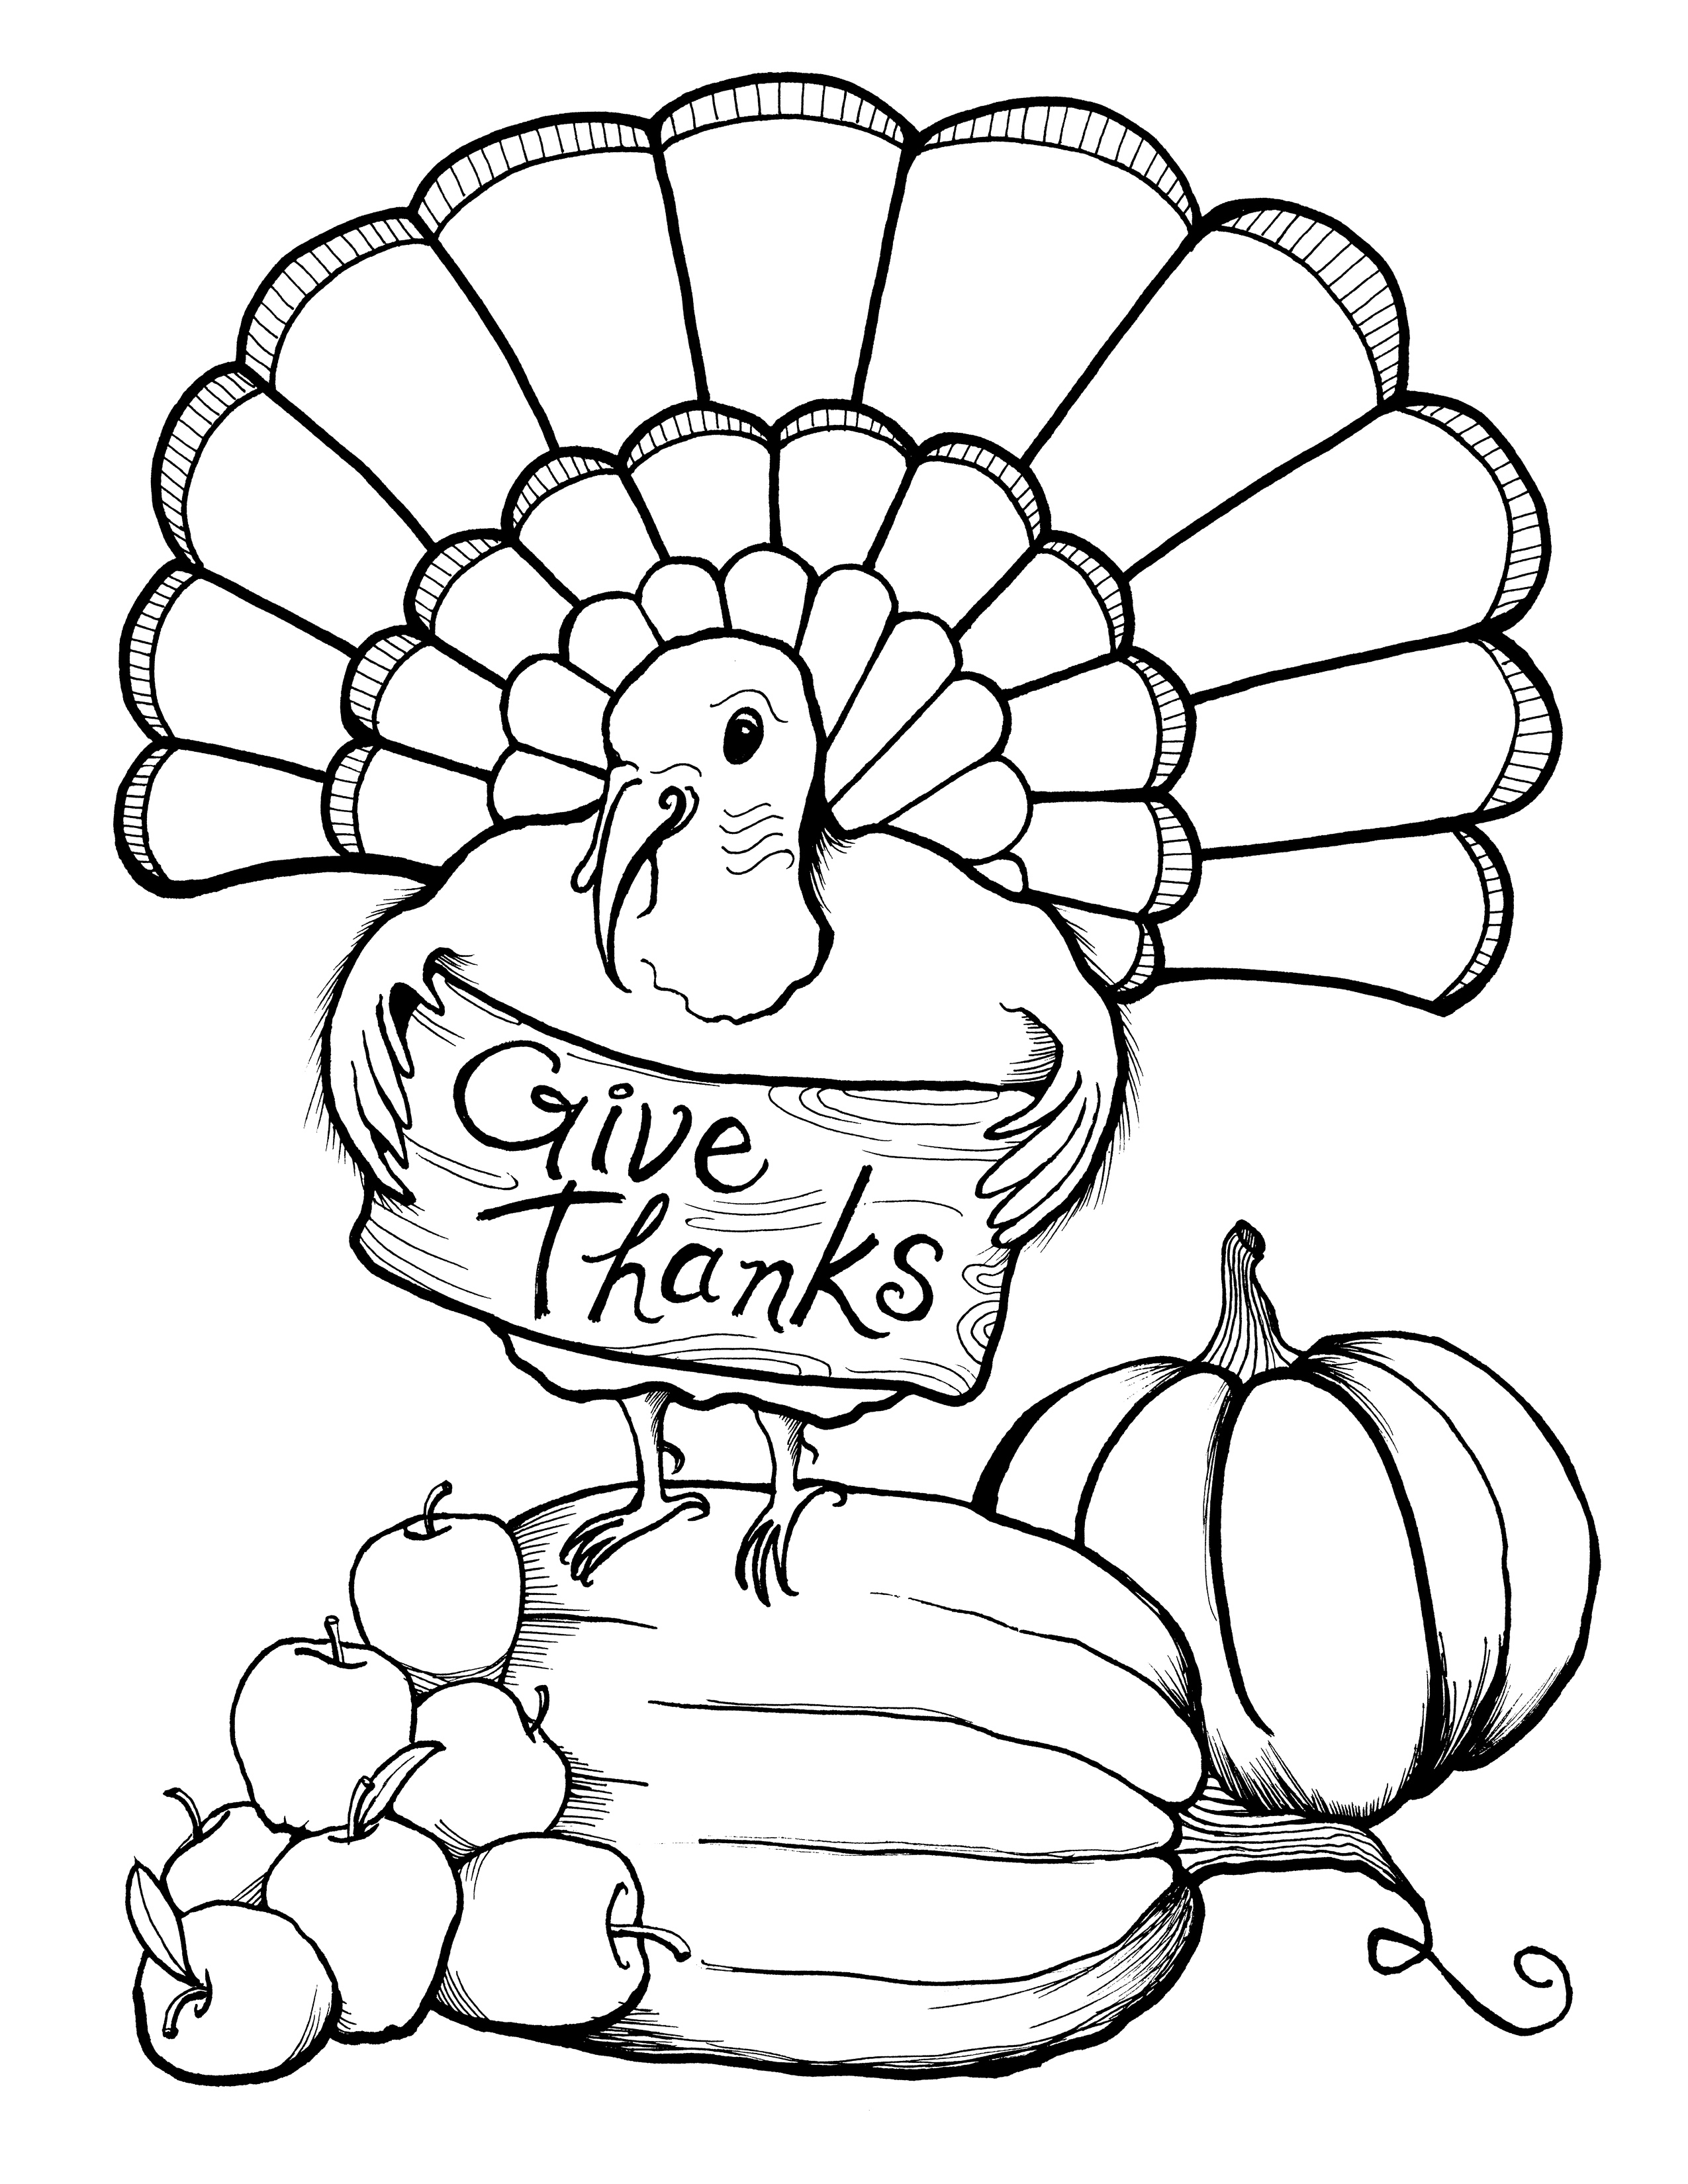 Printable Thanksgiving Coloring Pages | ColoringMe.com